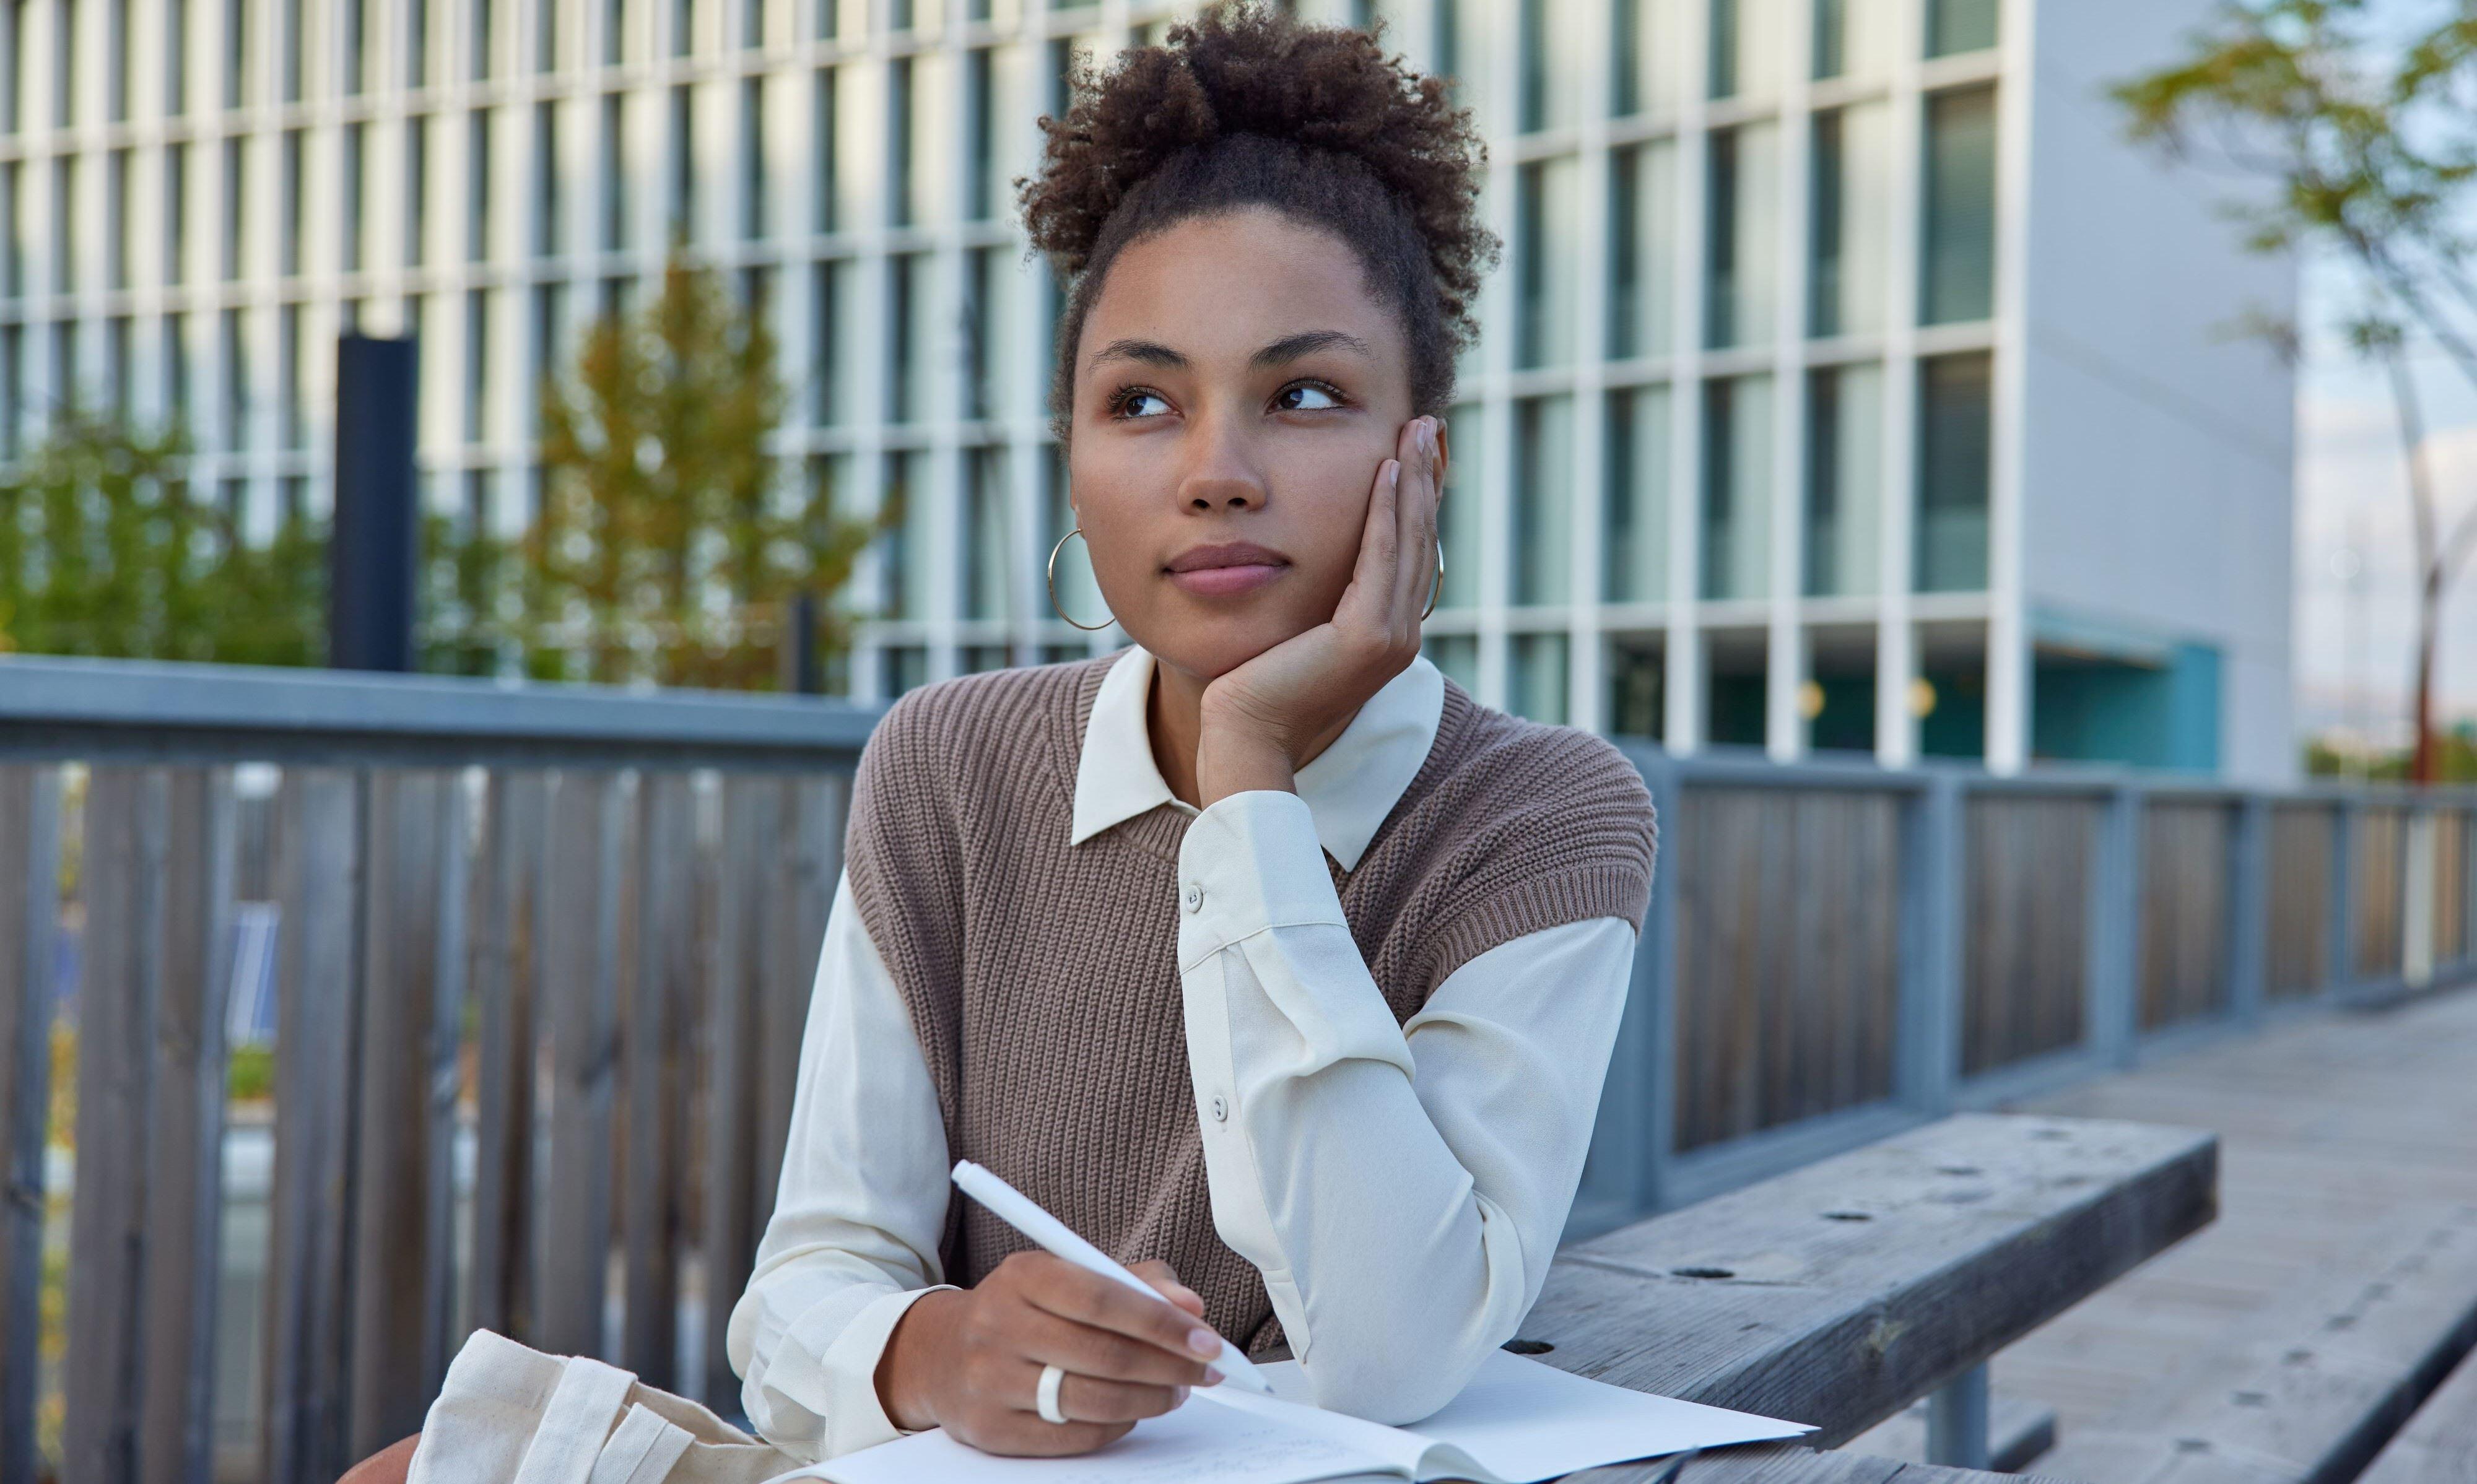 thoughtful college student sitting at outdoor table with pen in hand